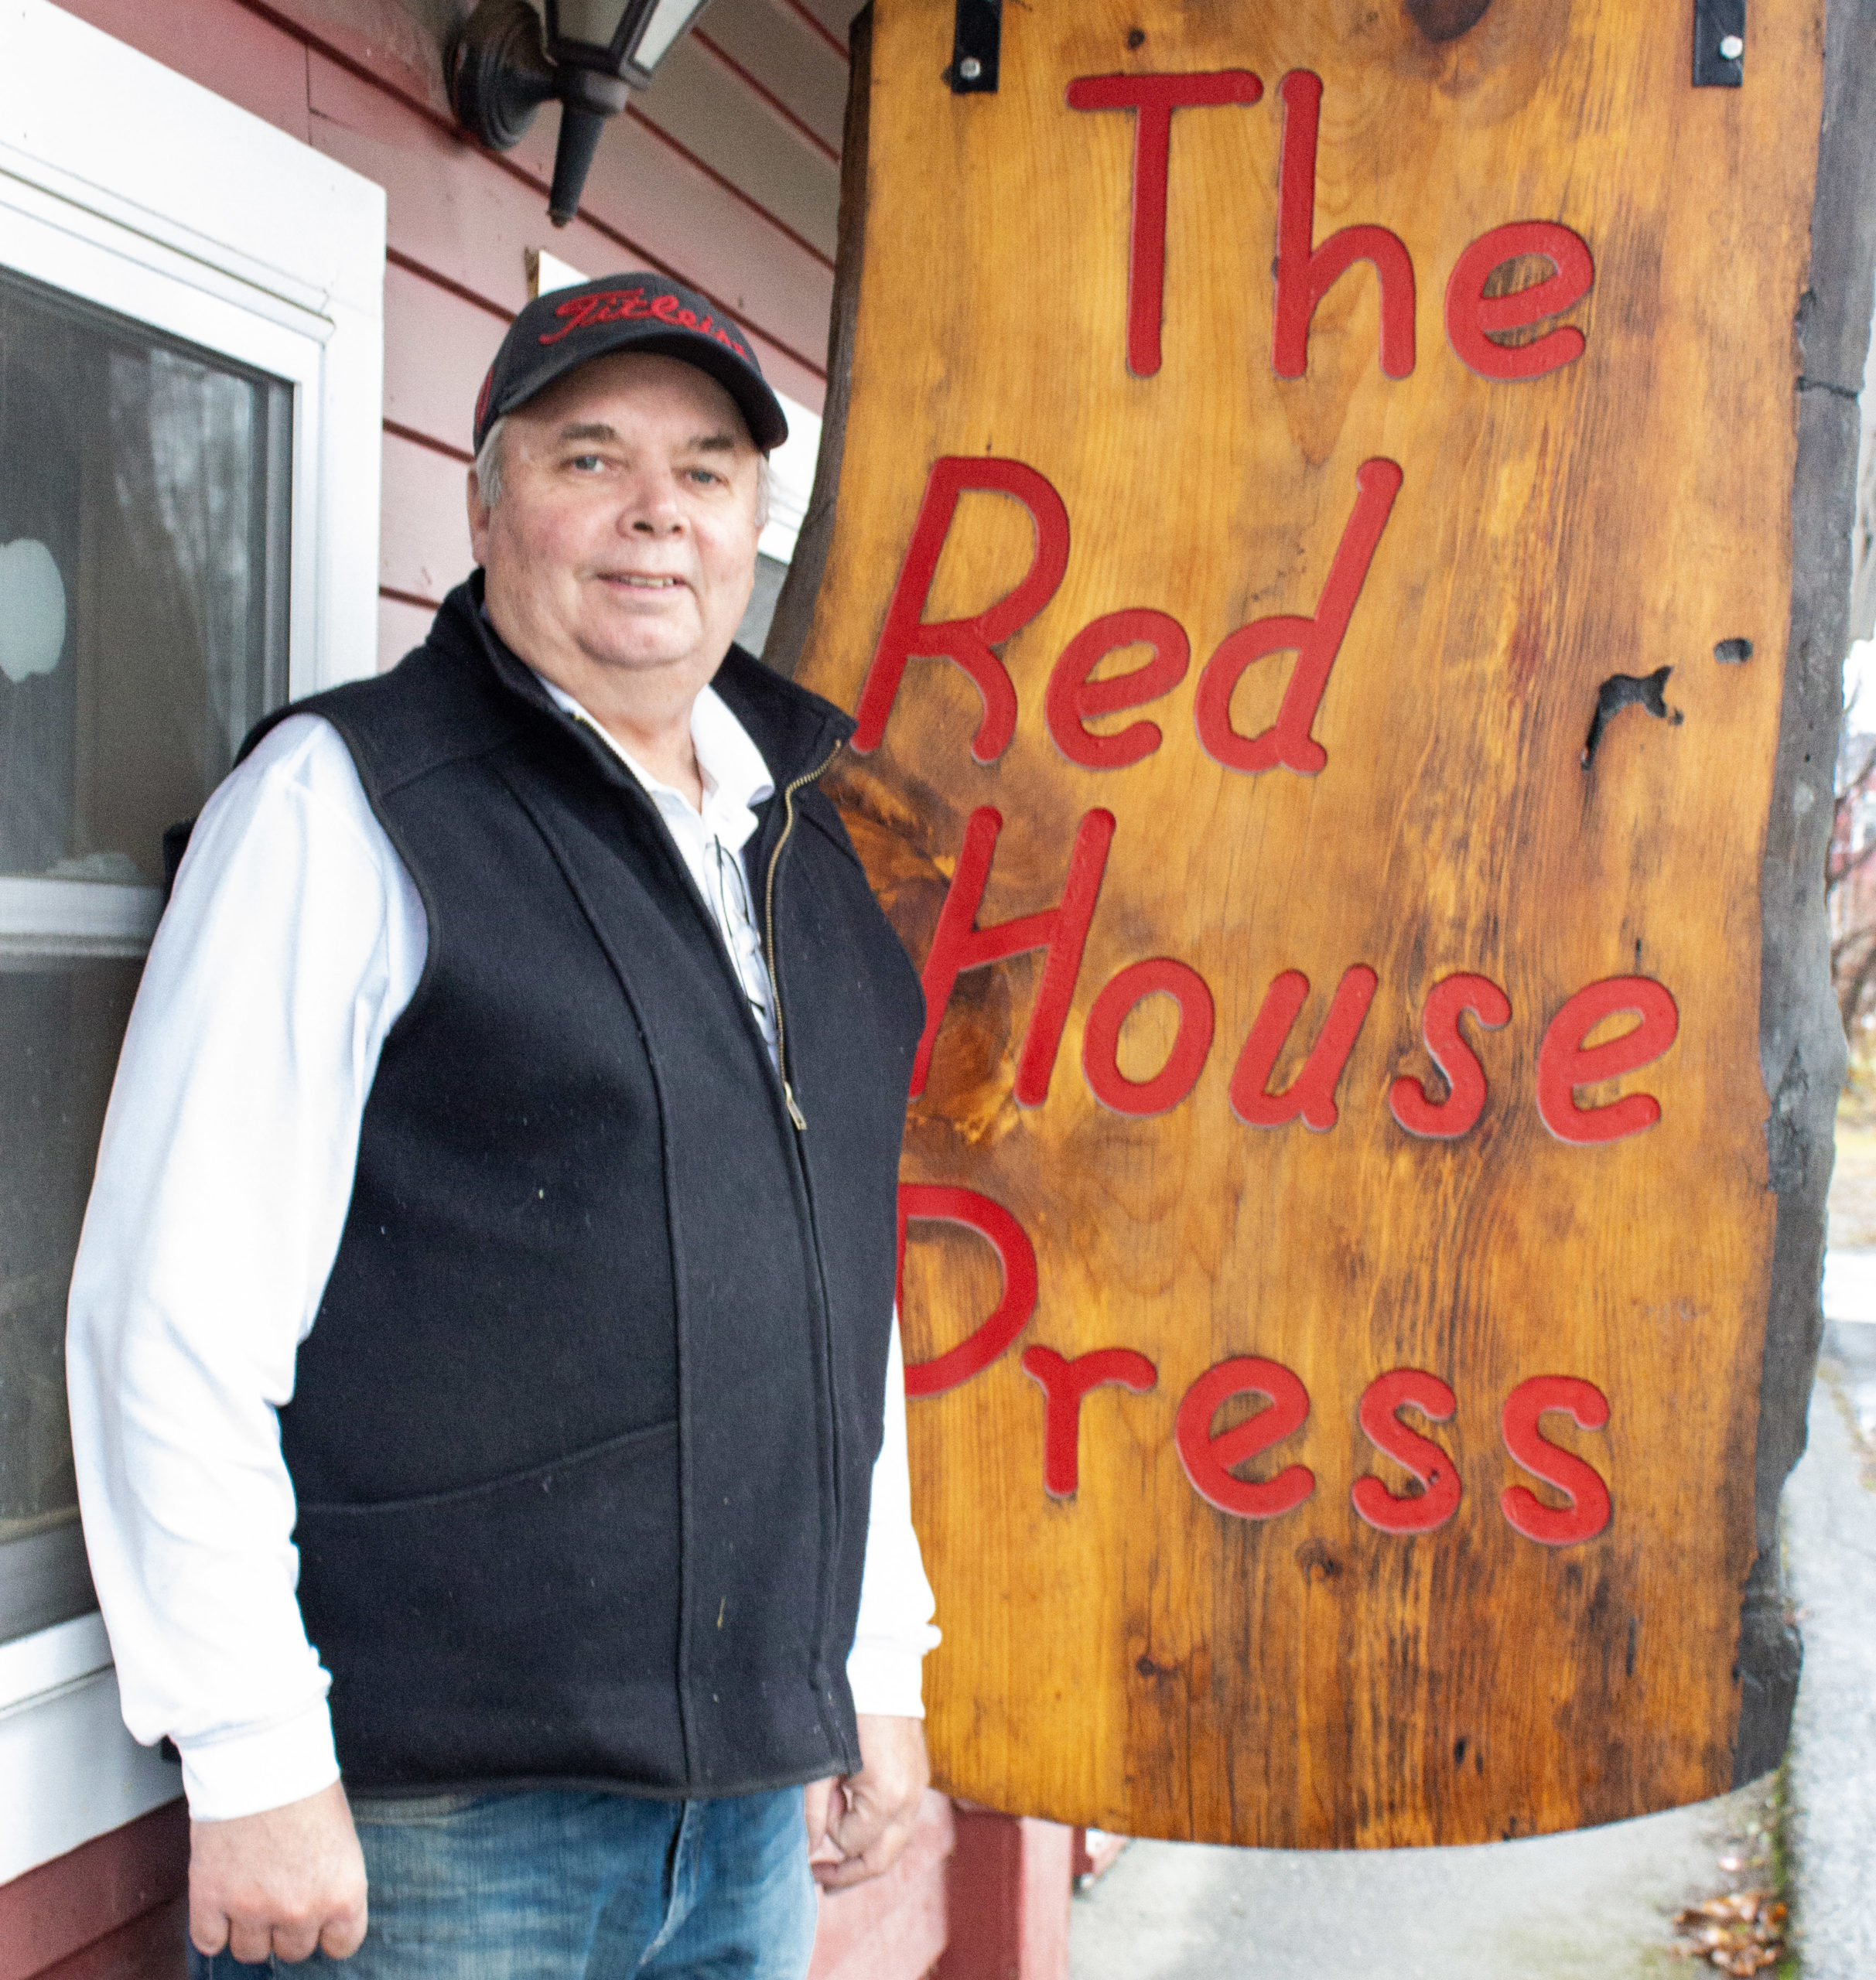 Dan, Red House Press Corporation owner